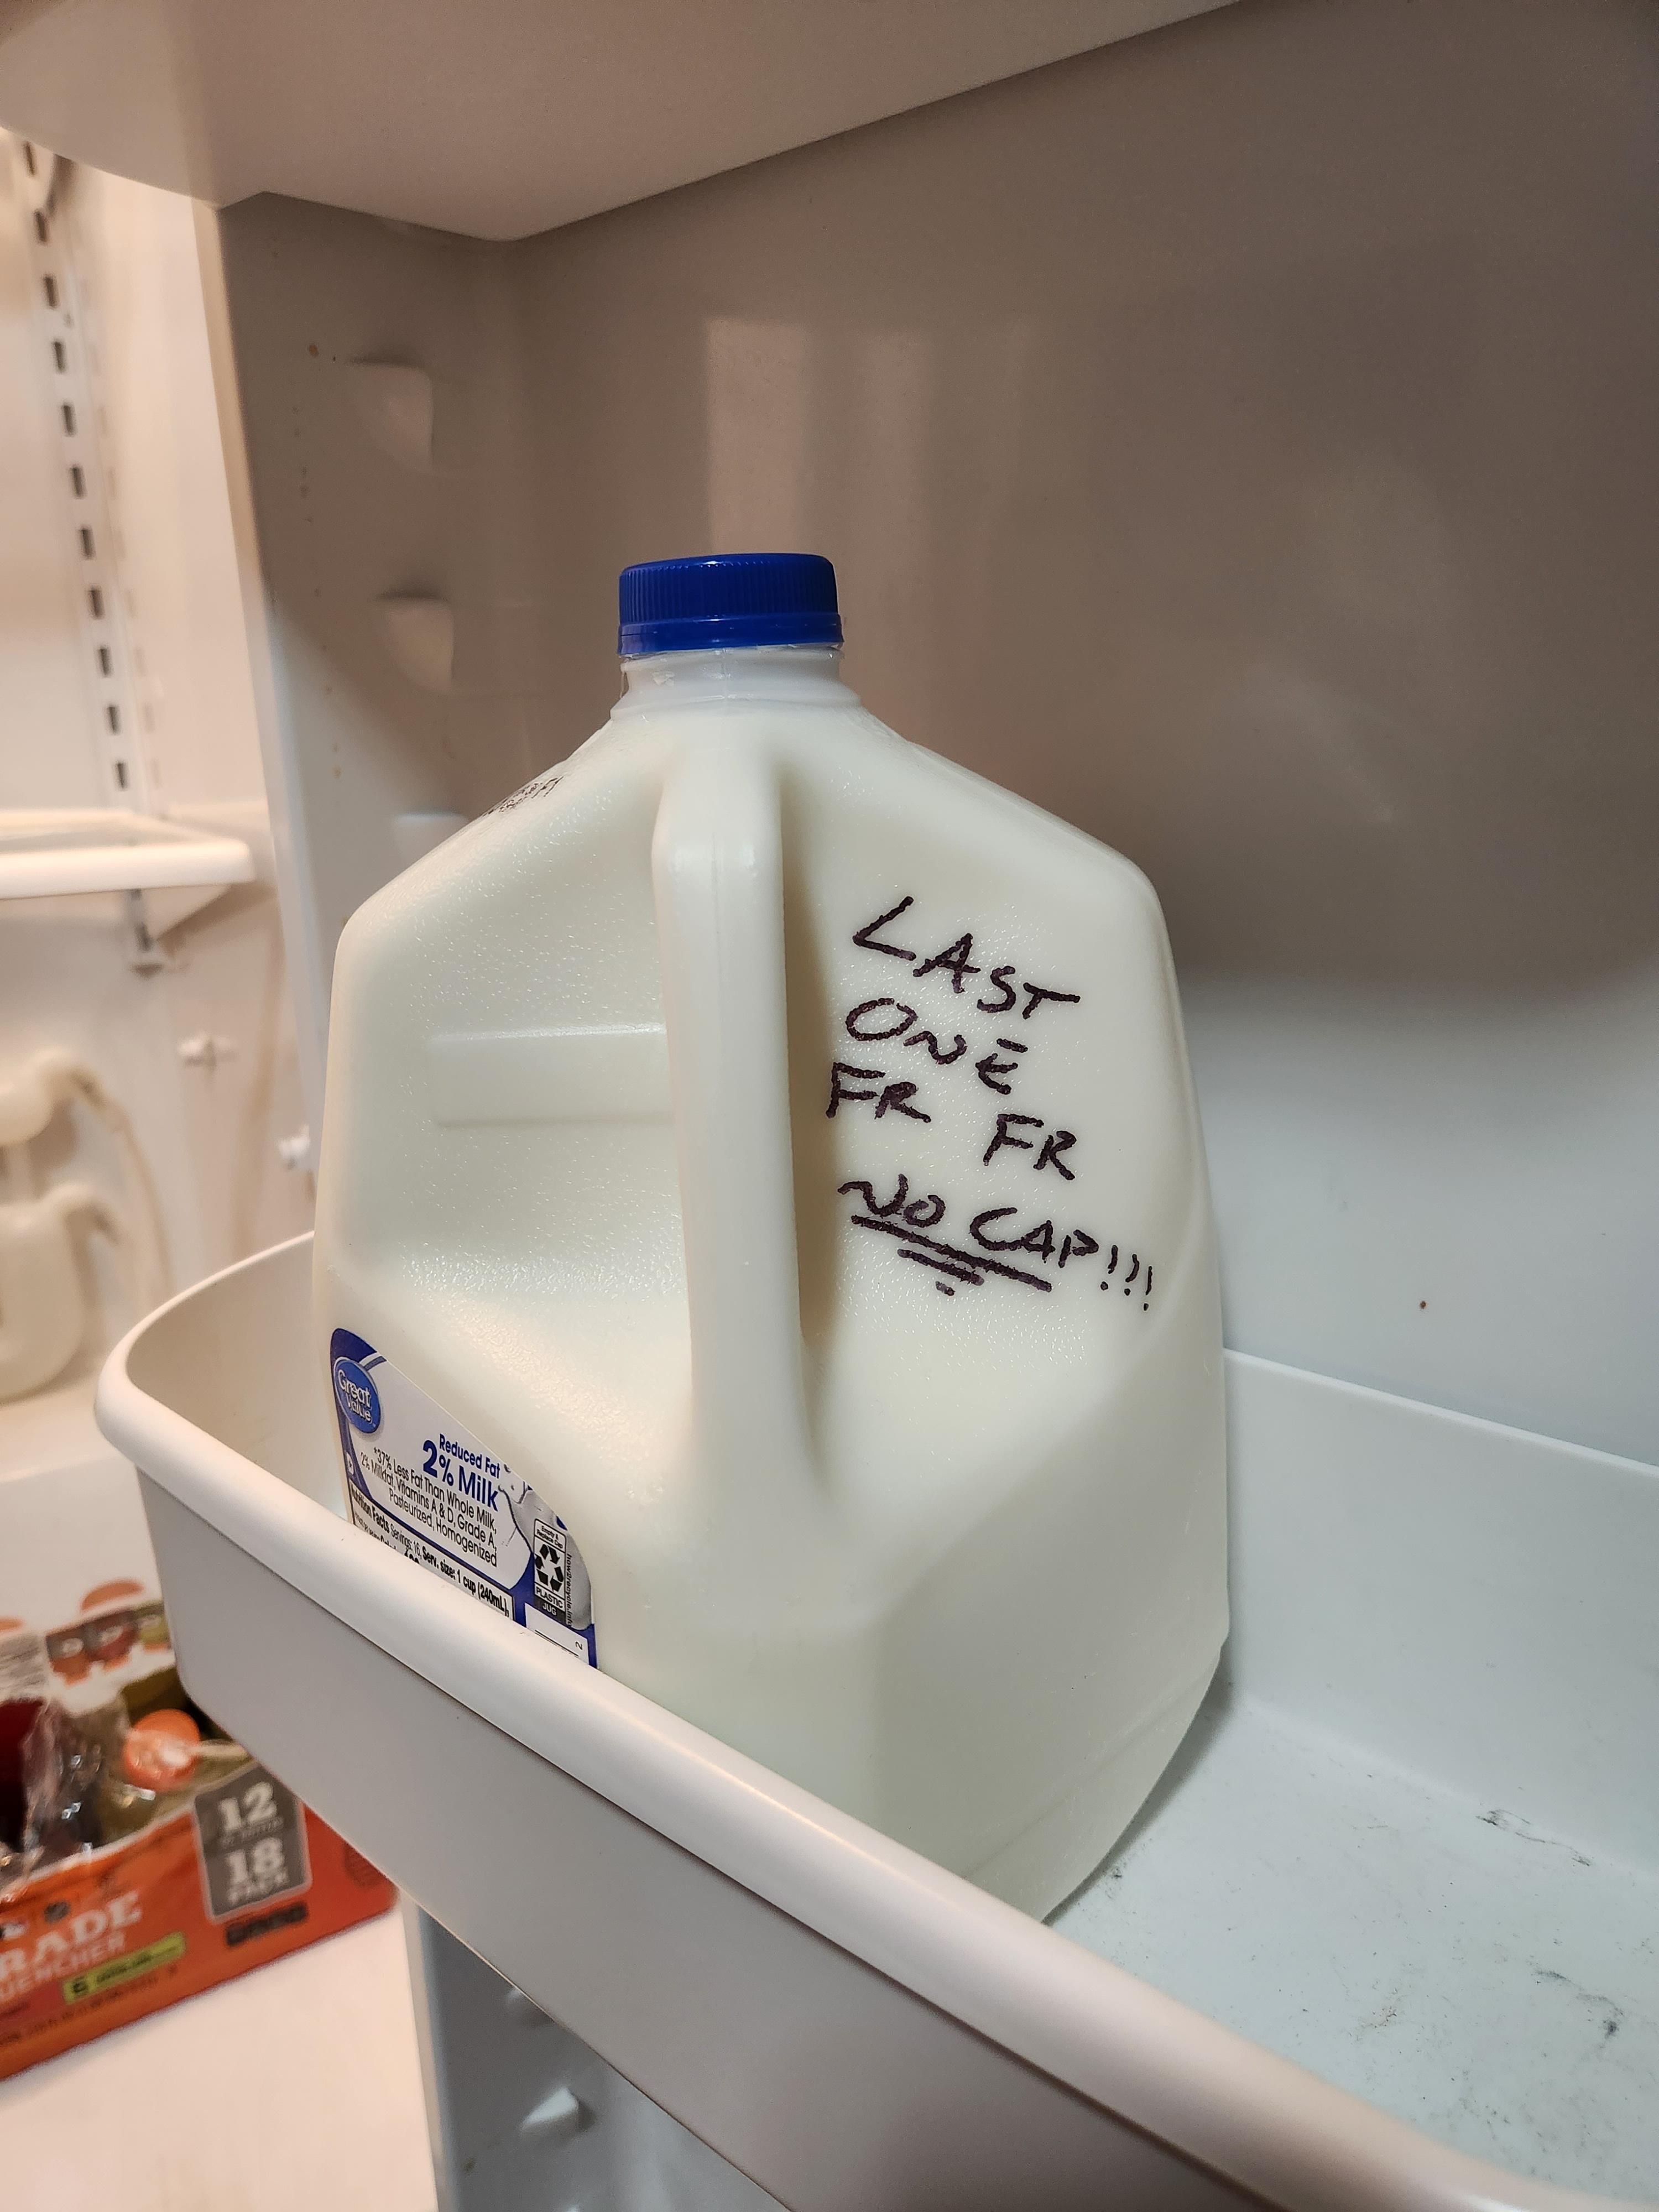 With four kids, I need a way to communicate with them so that we don't run out of milk. So far it's working great.